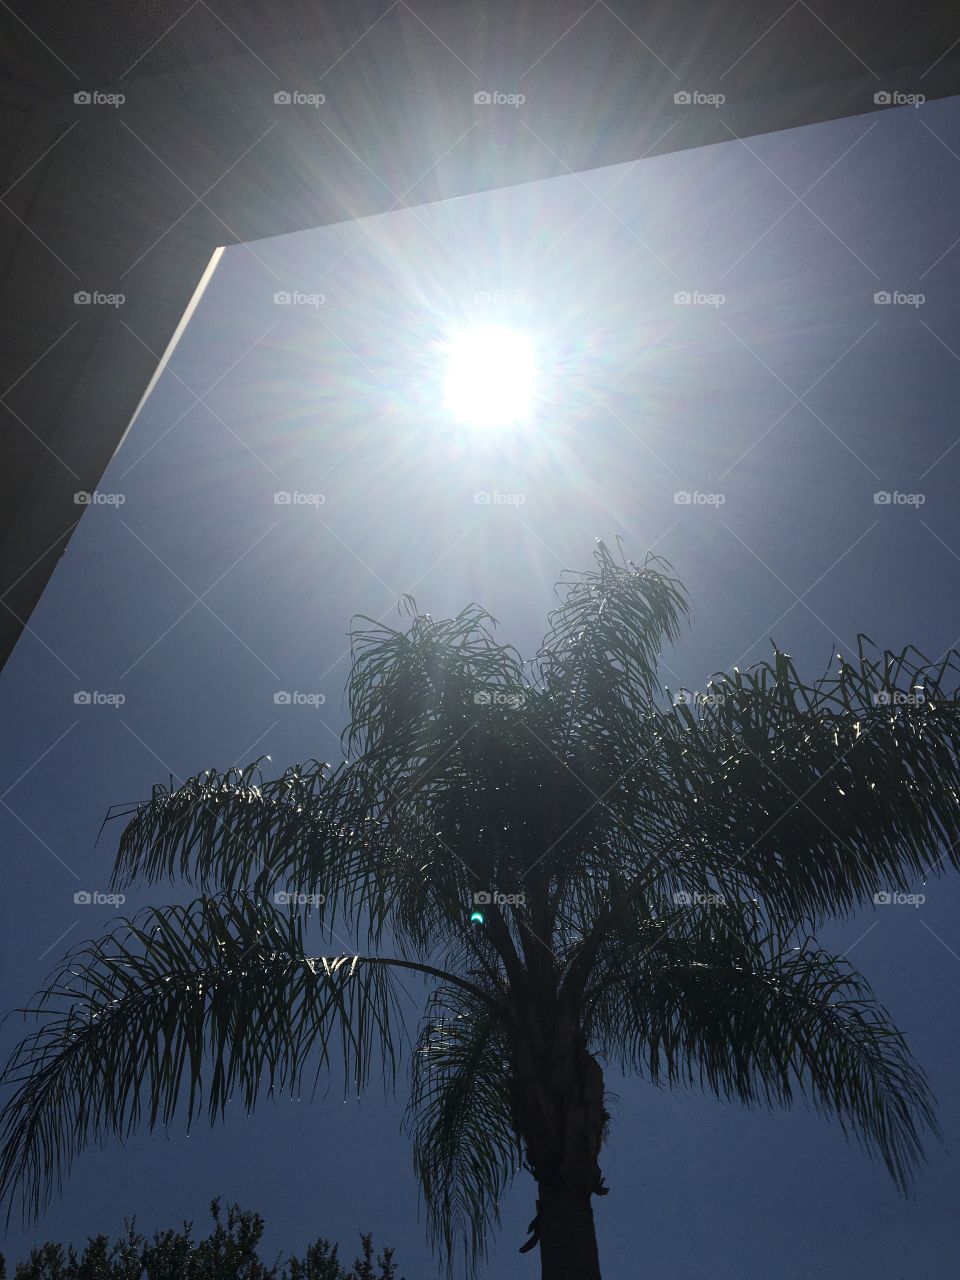 Eclipse Tampa Florida Unique sun rays flowing through the palm trees the eclipse causing a rather unusual shift in the energy we all felt at the moment as well as well as the neon grew light that’s unexplainable in a few of these pictures.